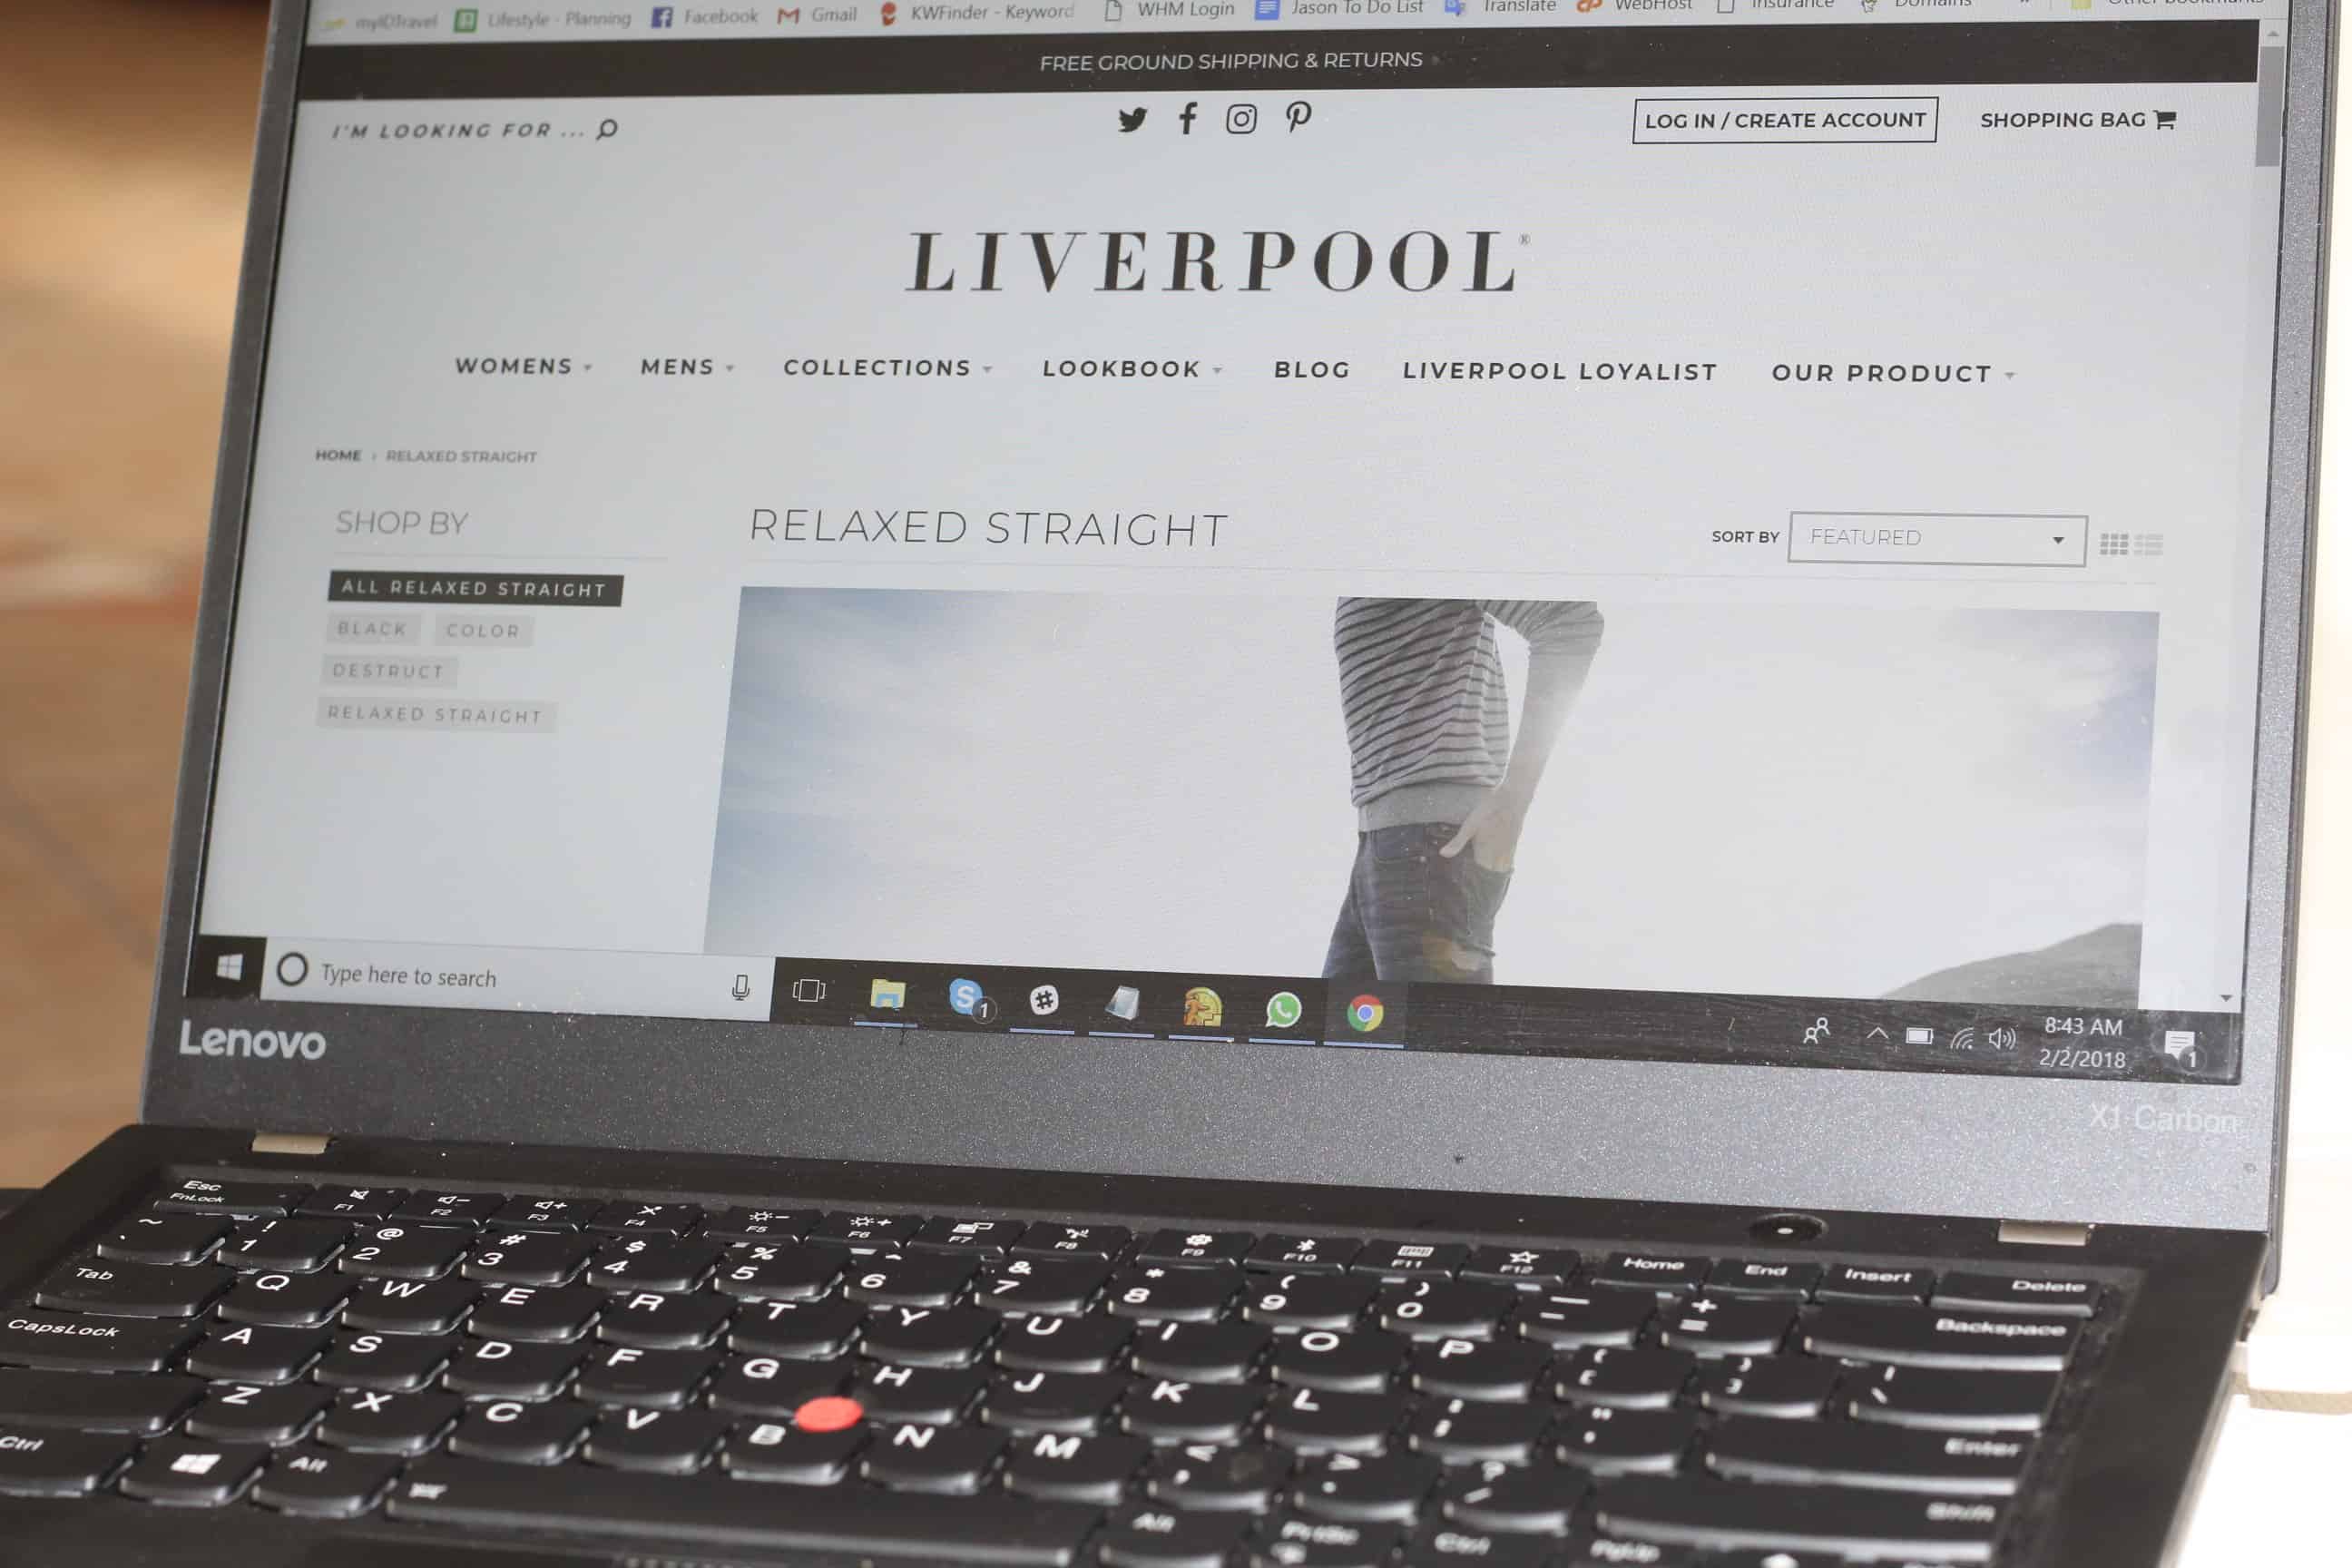 Online Shopping - Denim Options For Men Of All Shapes & Sizes From Liverpool Jeans